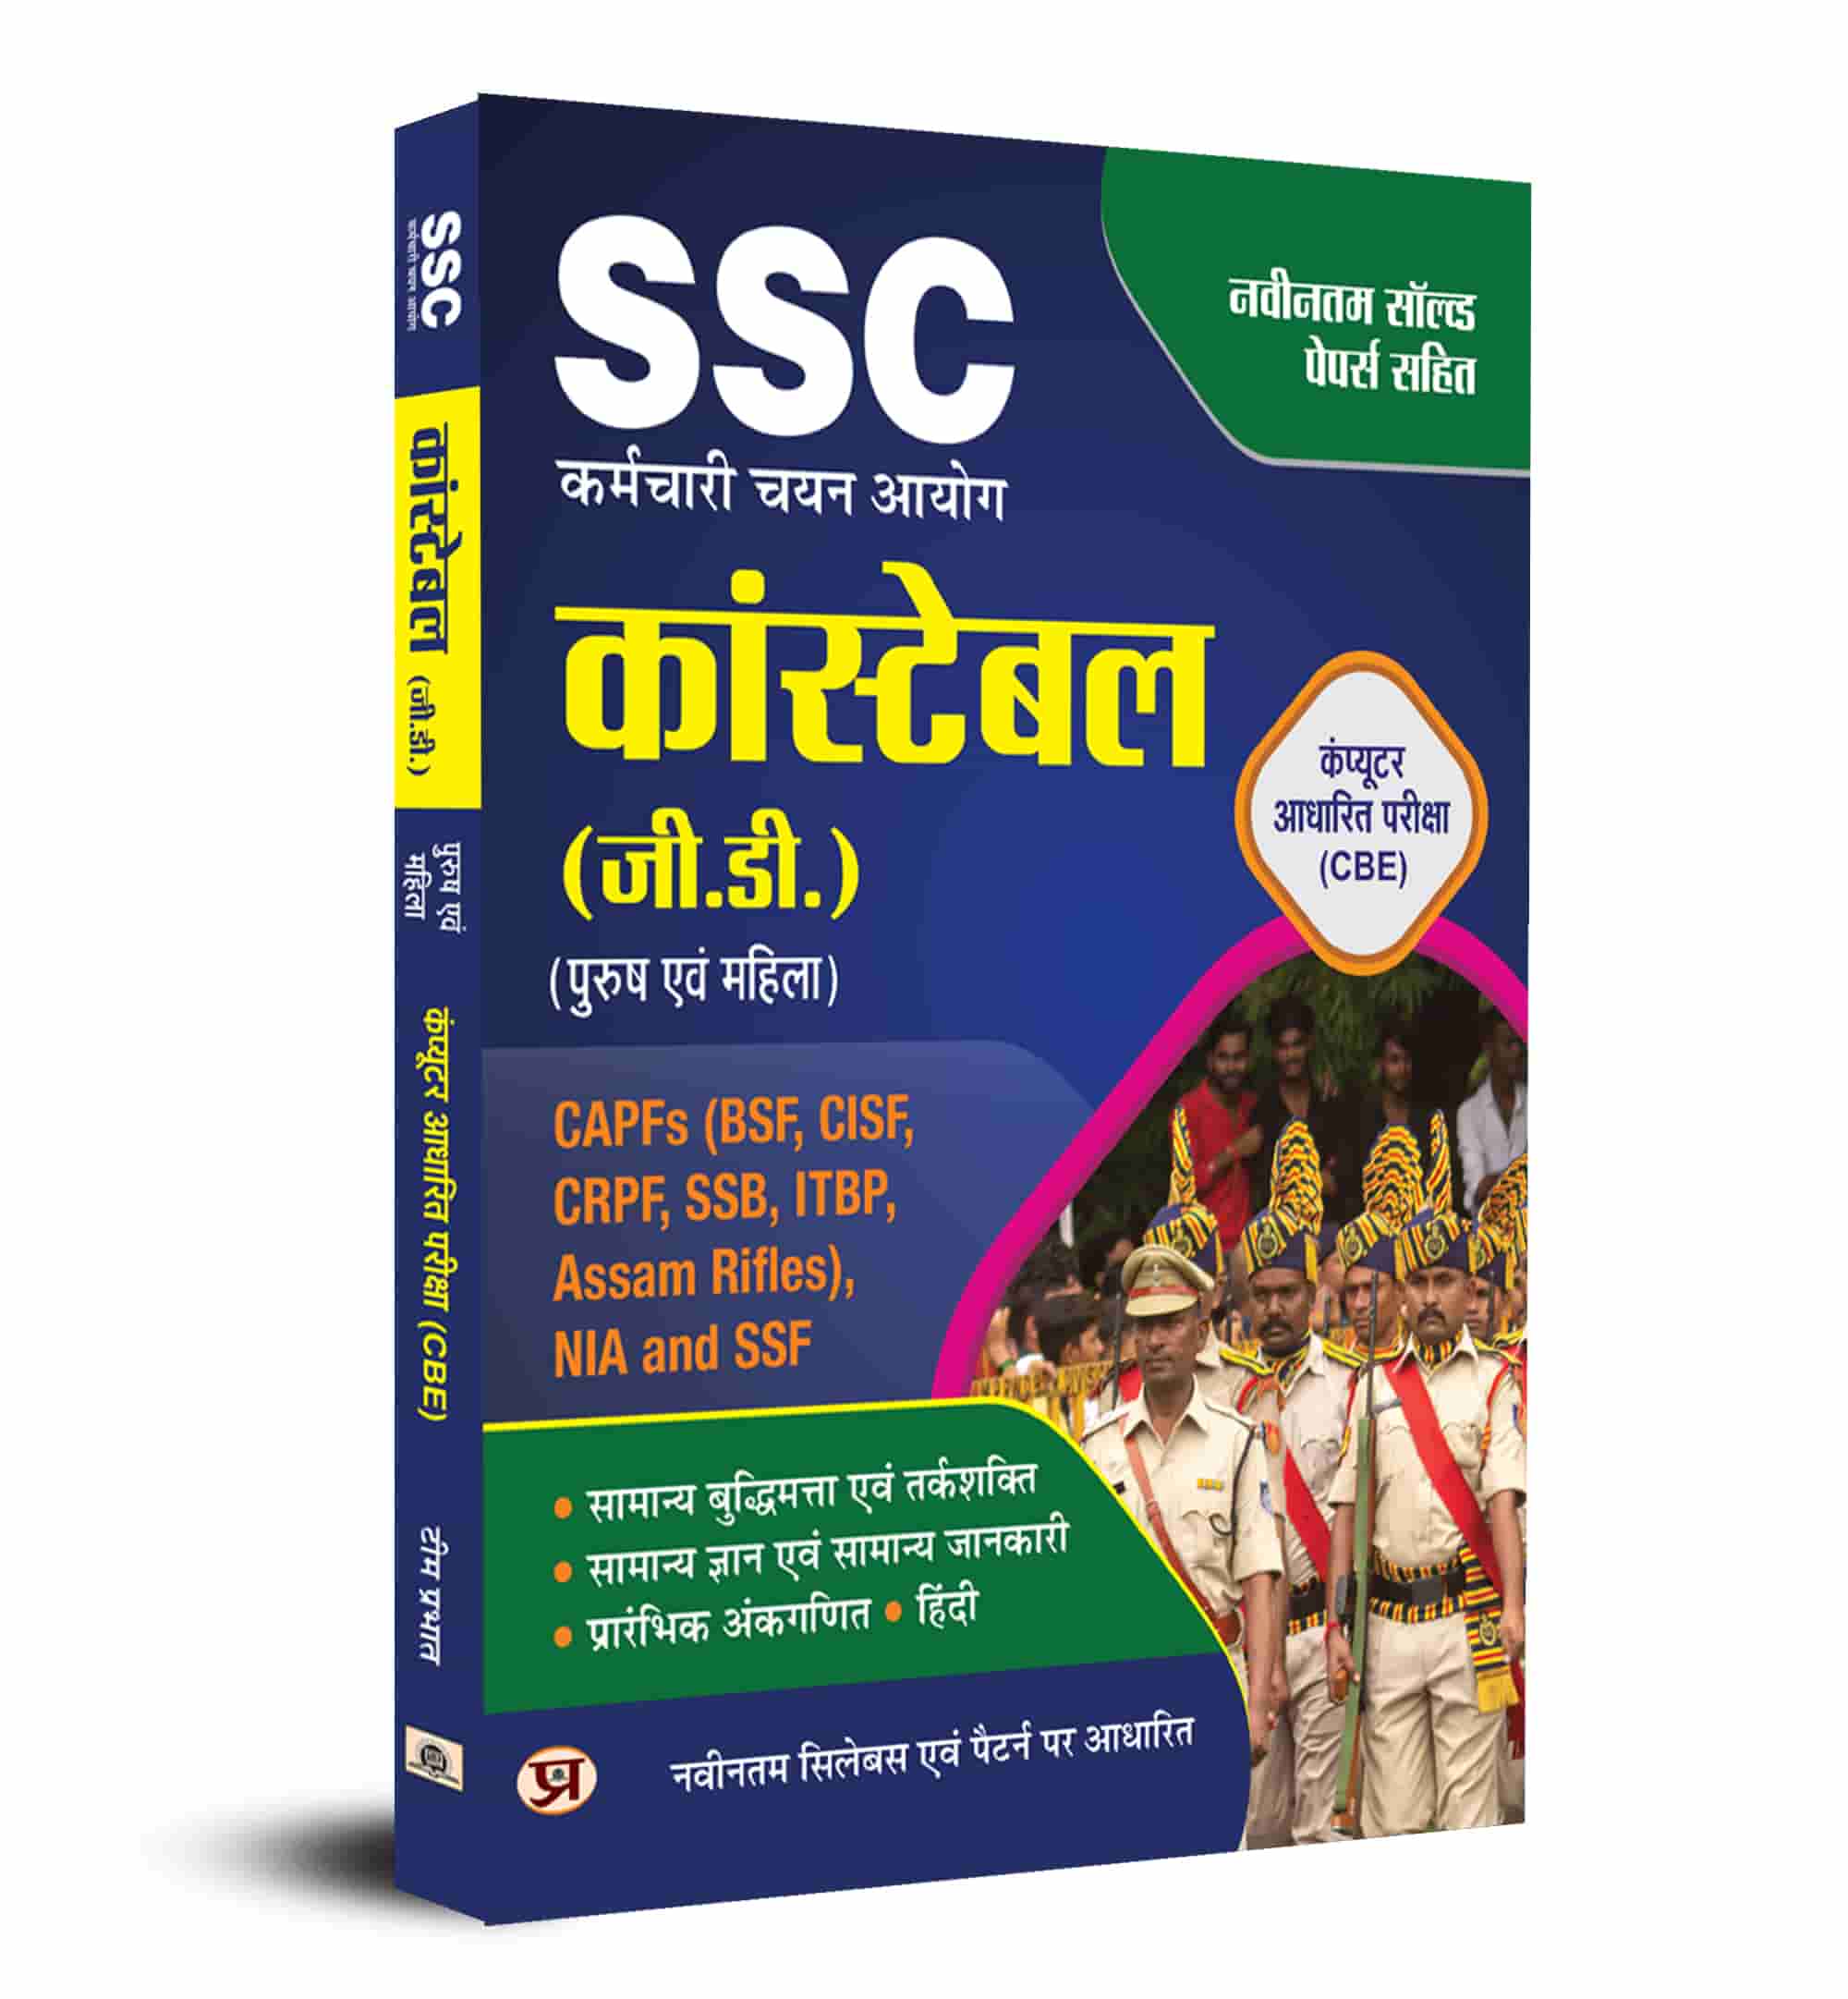 SSC GD Constable Computer Based Examination (CBE) Complete Study Guide...